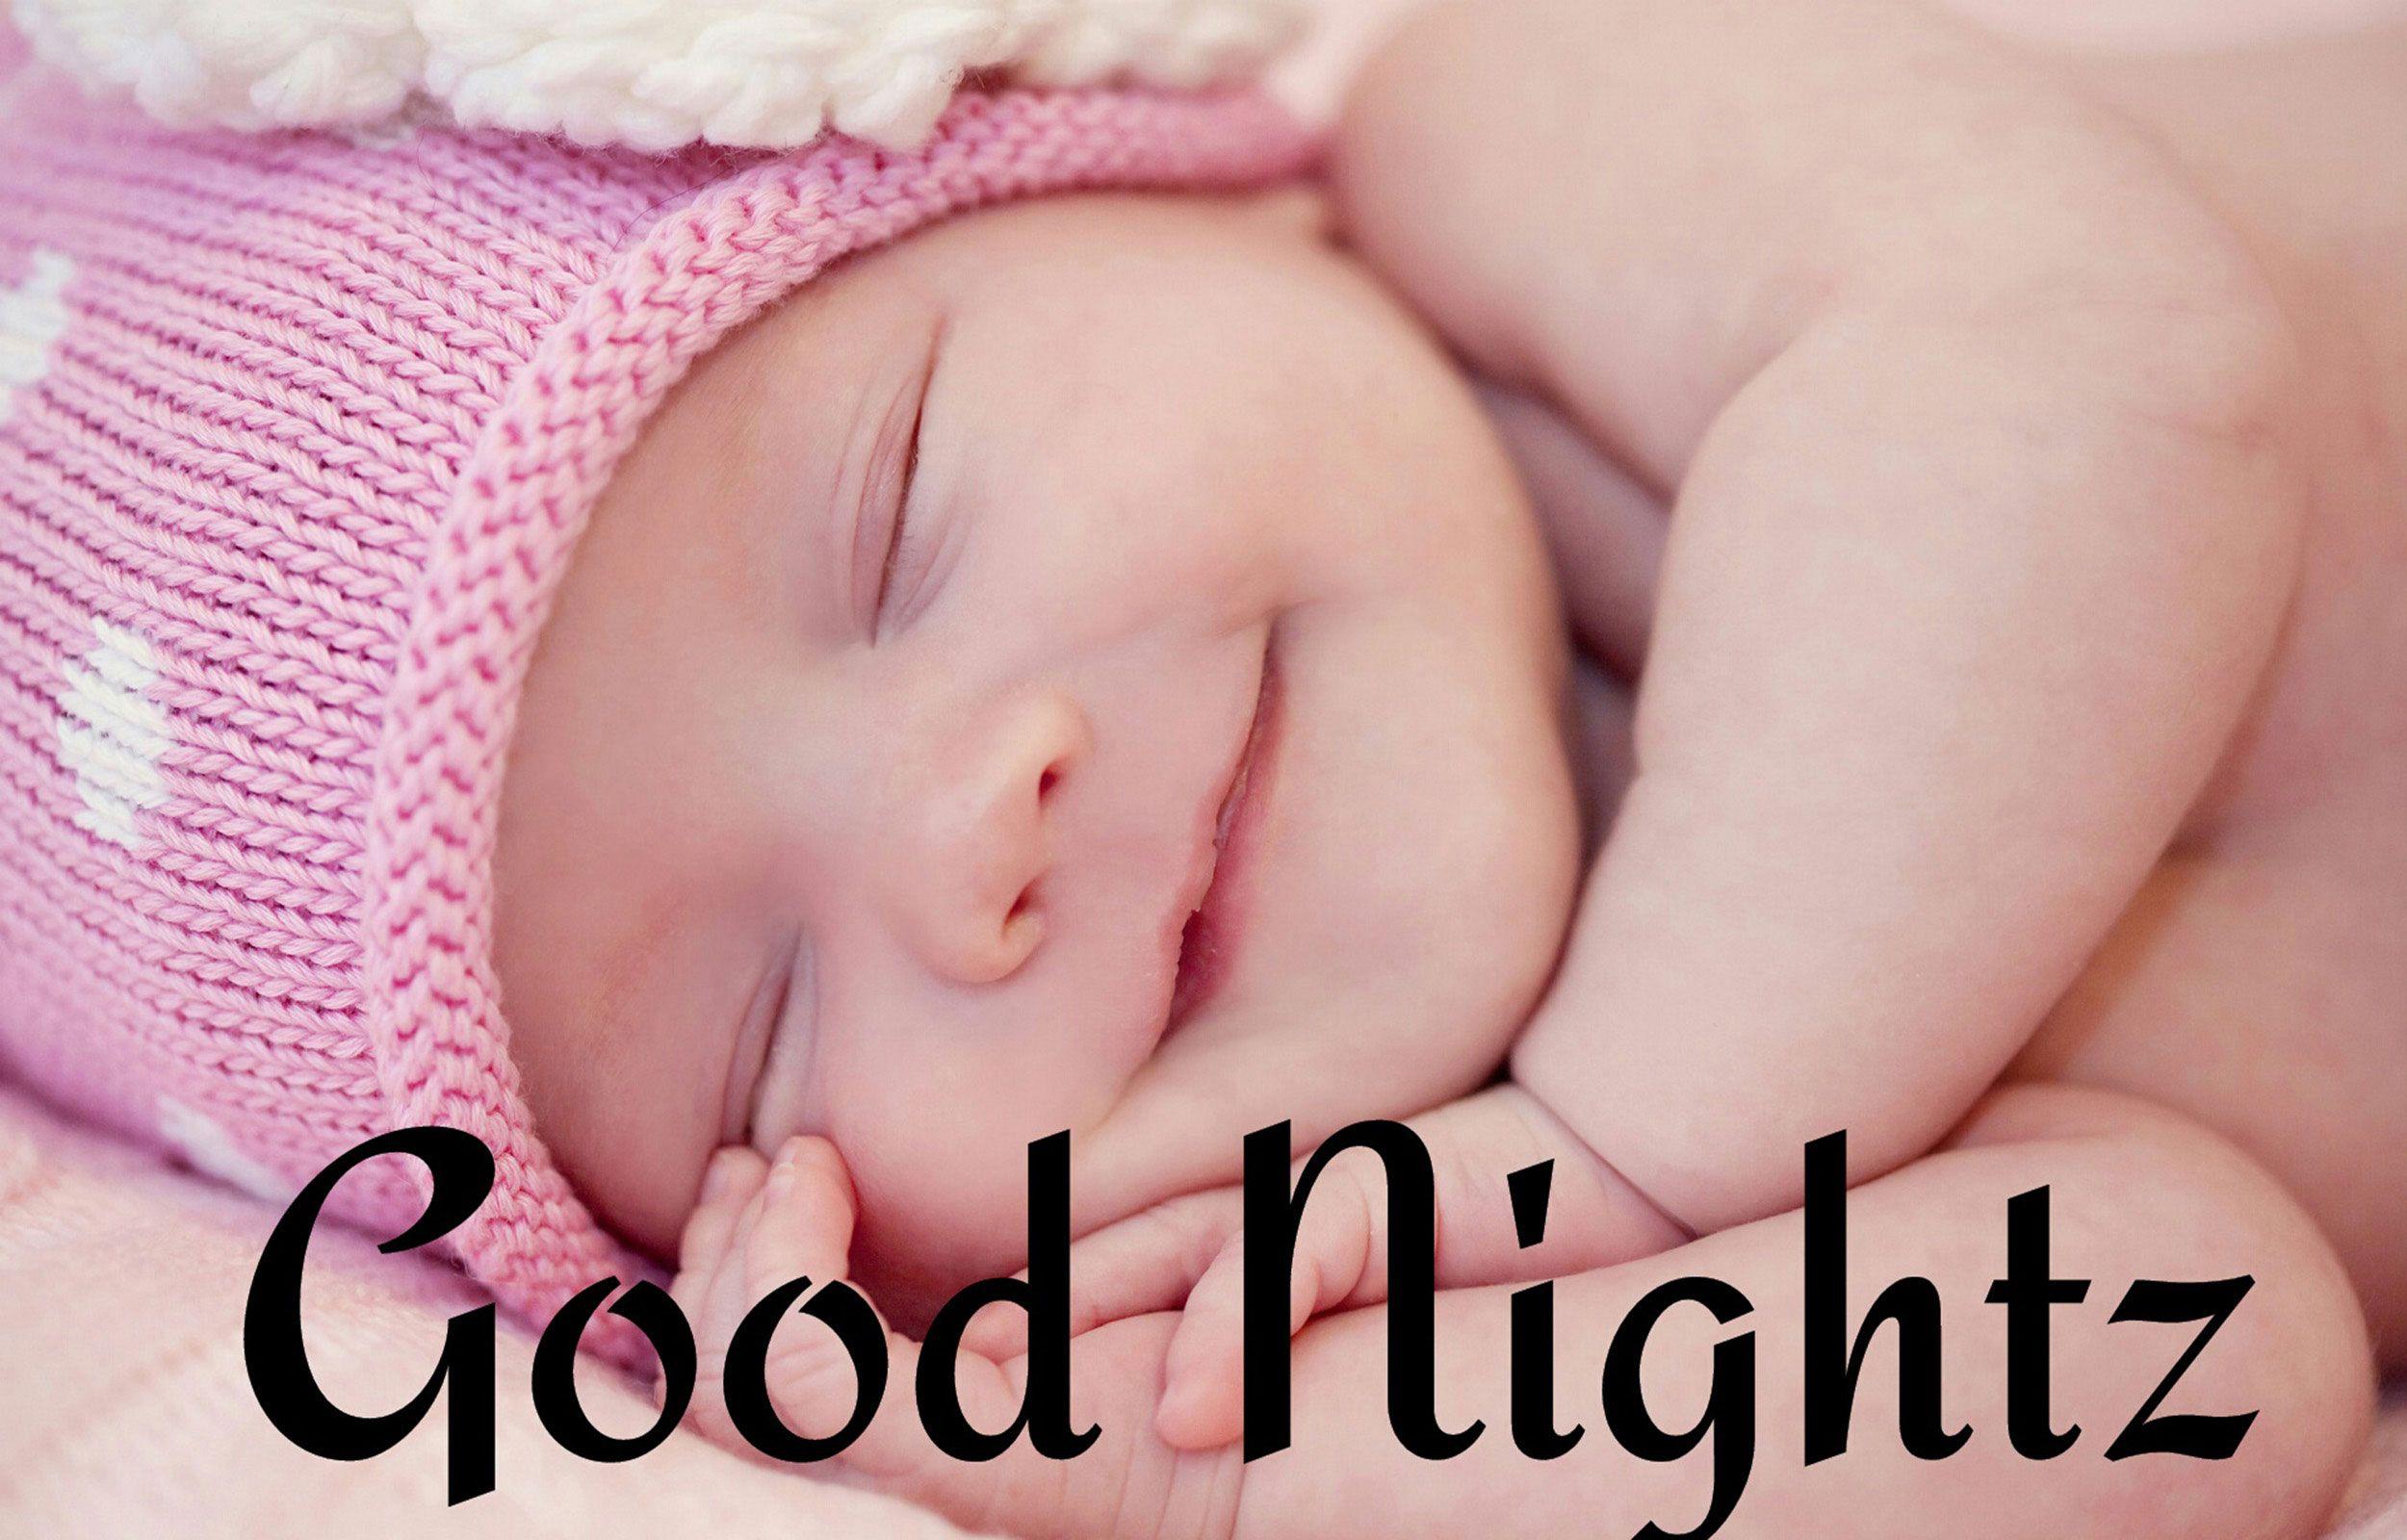 Good Night Baby Wallpaper (Picture)